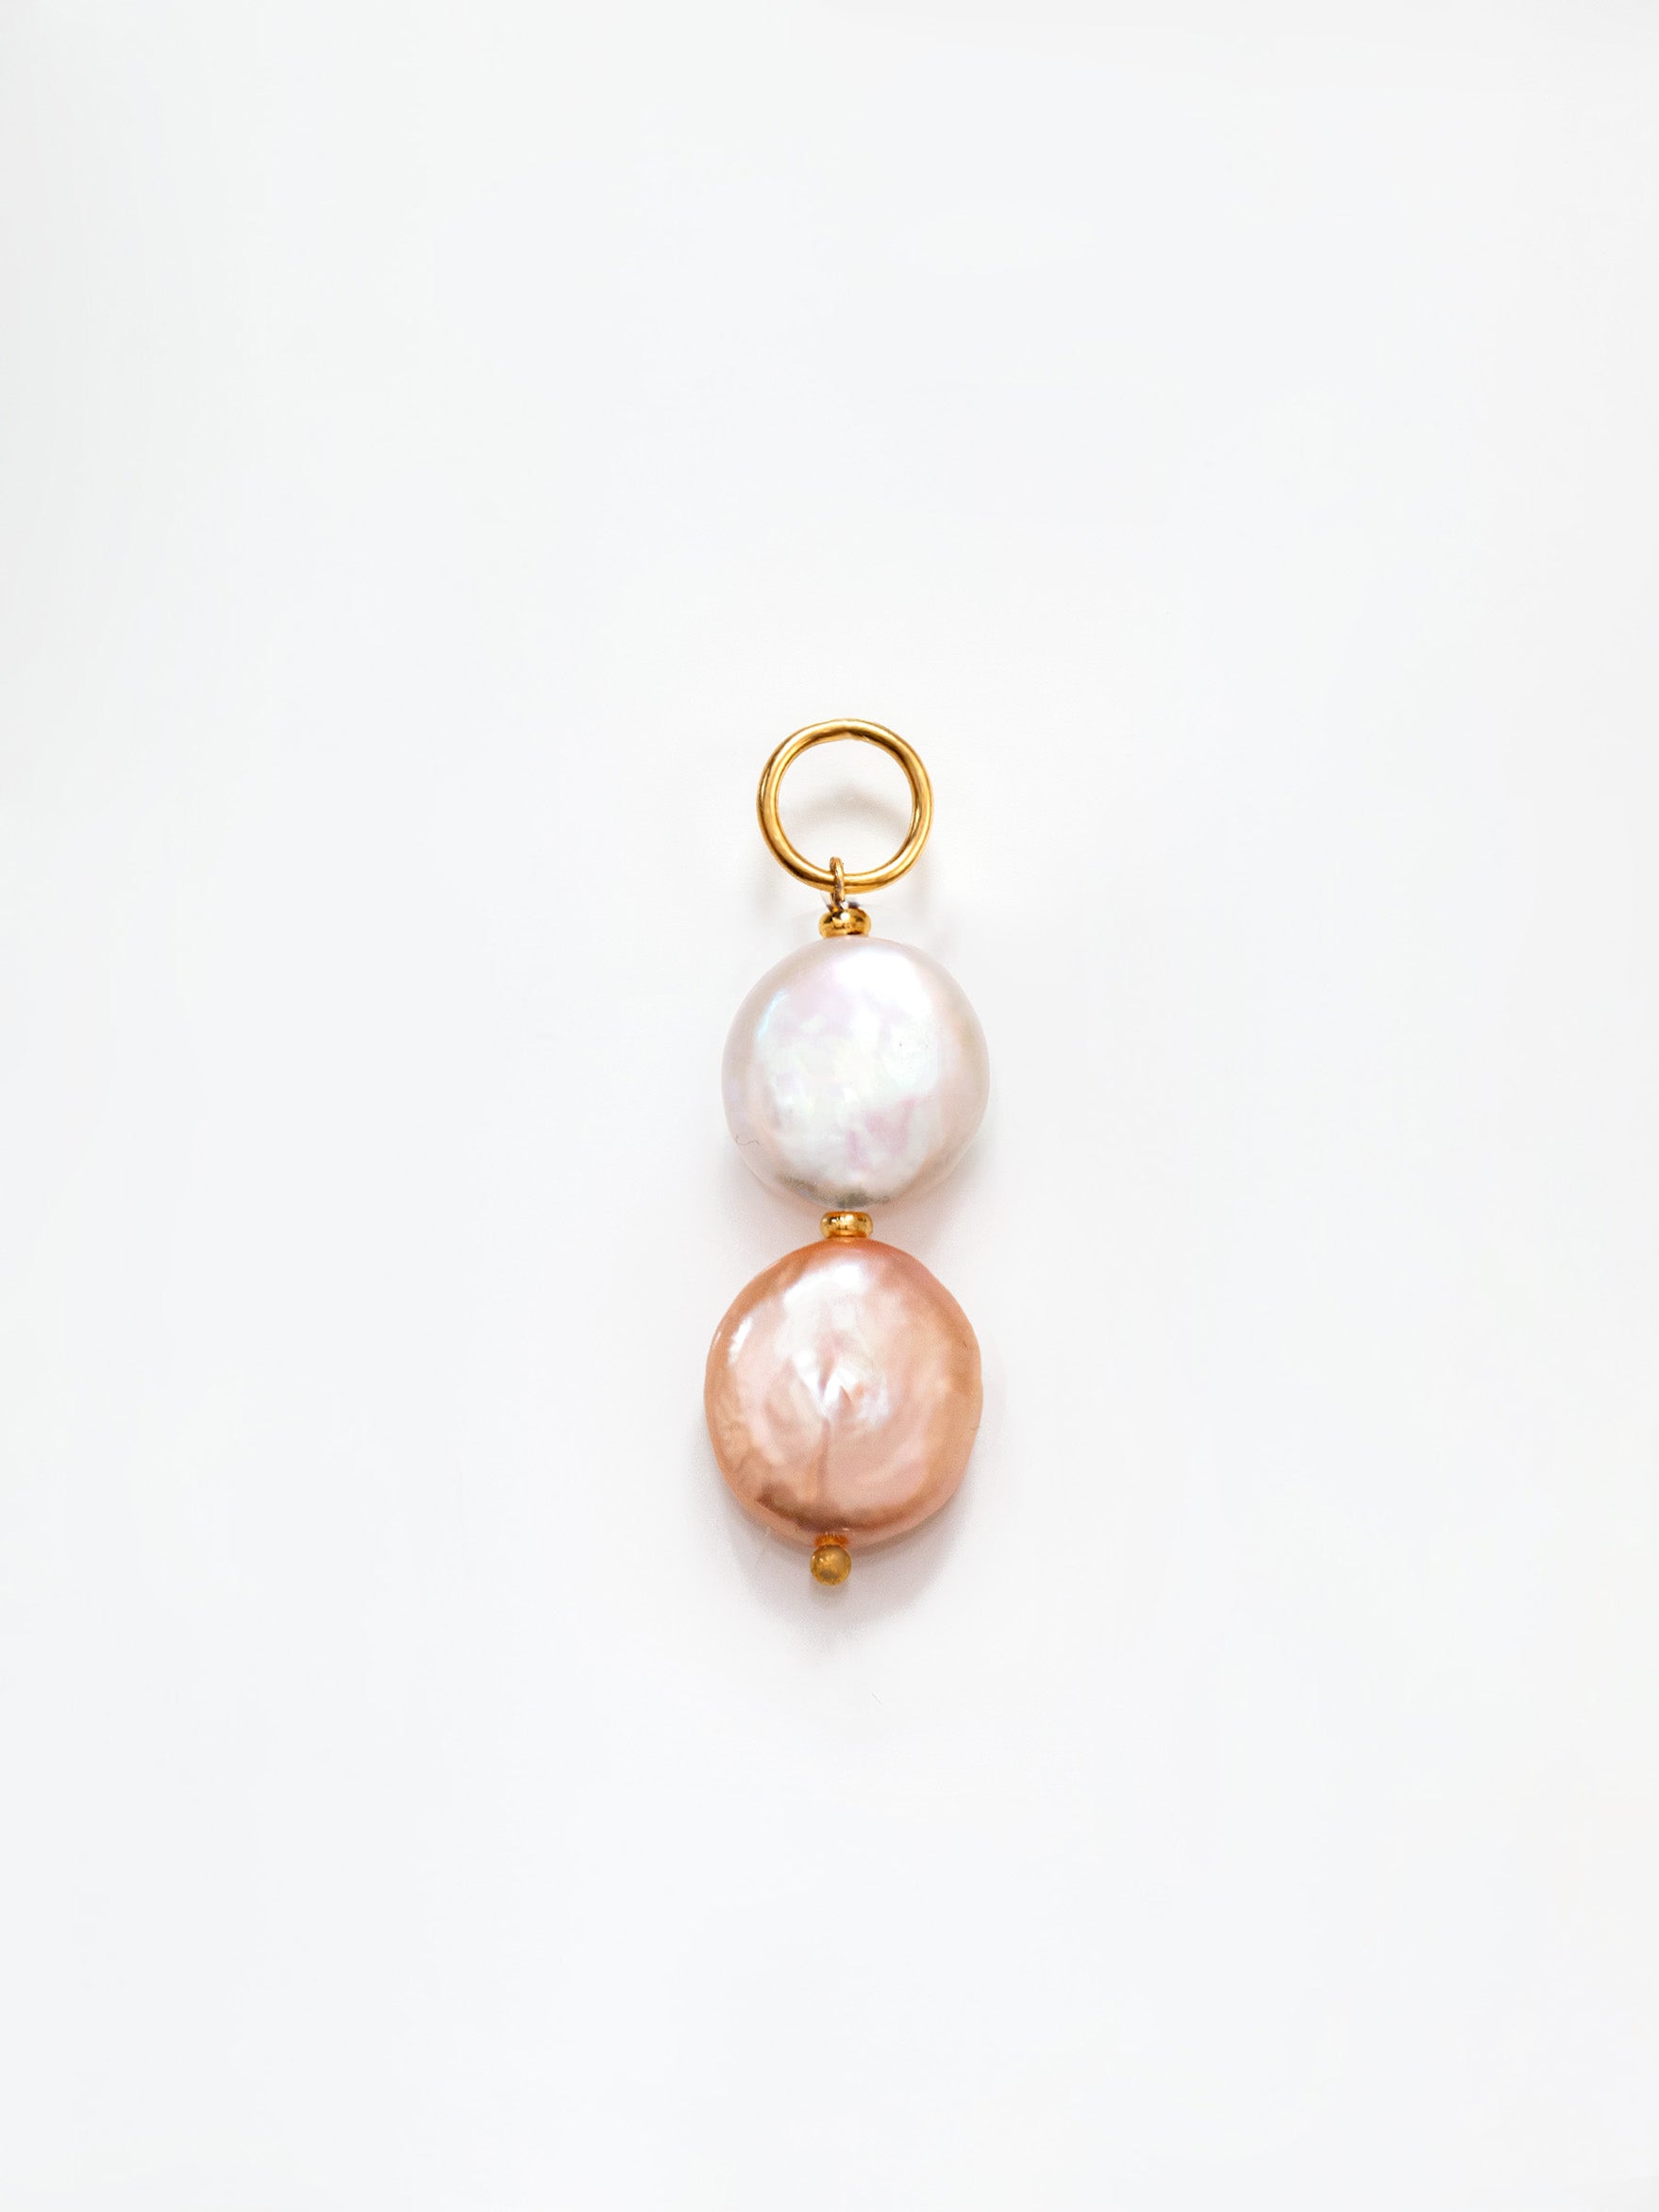 Gold Pendant / Charm With Two Baroque Button Pearls (White & Pink)